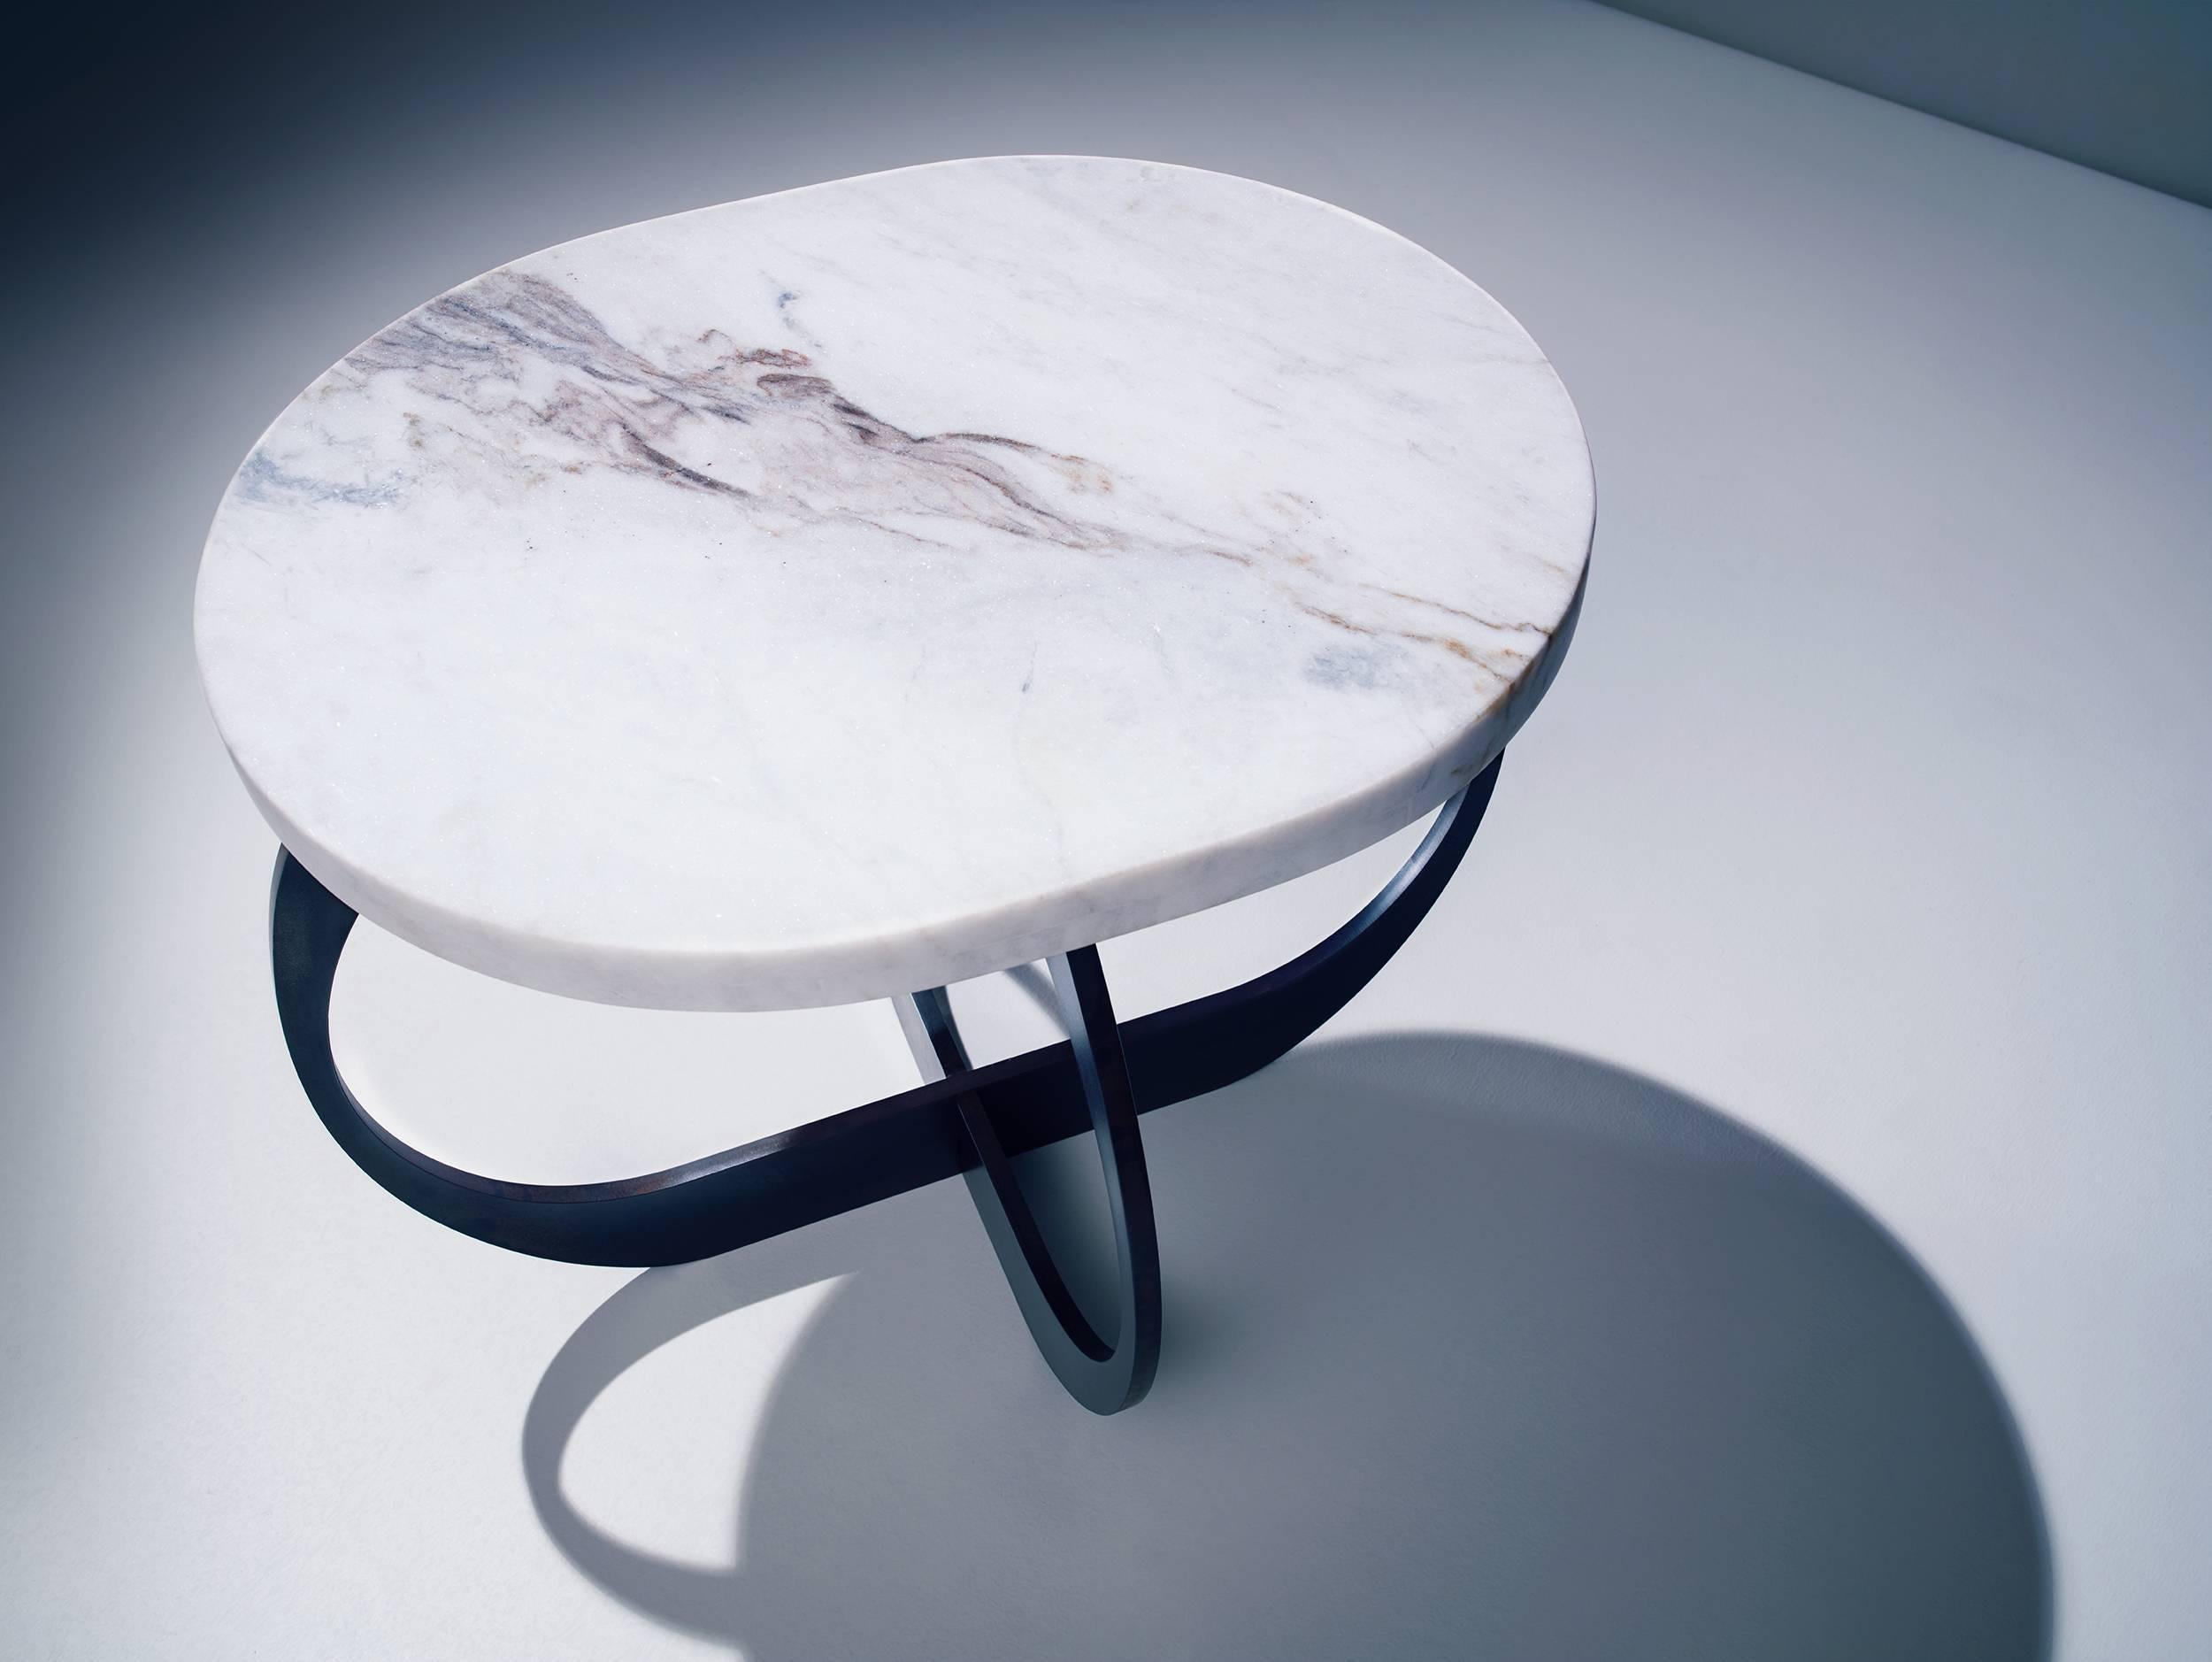 A smartly shaped side table that will be an instant style boost for your home.
The base is created from interlocking oval-shaped pieces of plate steel that fit together seamlessly.
Rare calacatta marble shines brightly against the deep blackened